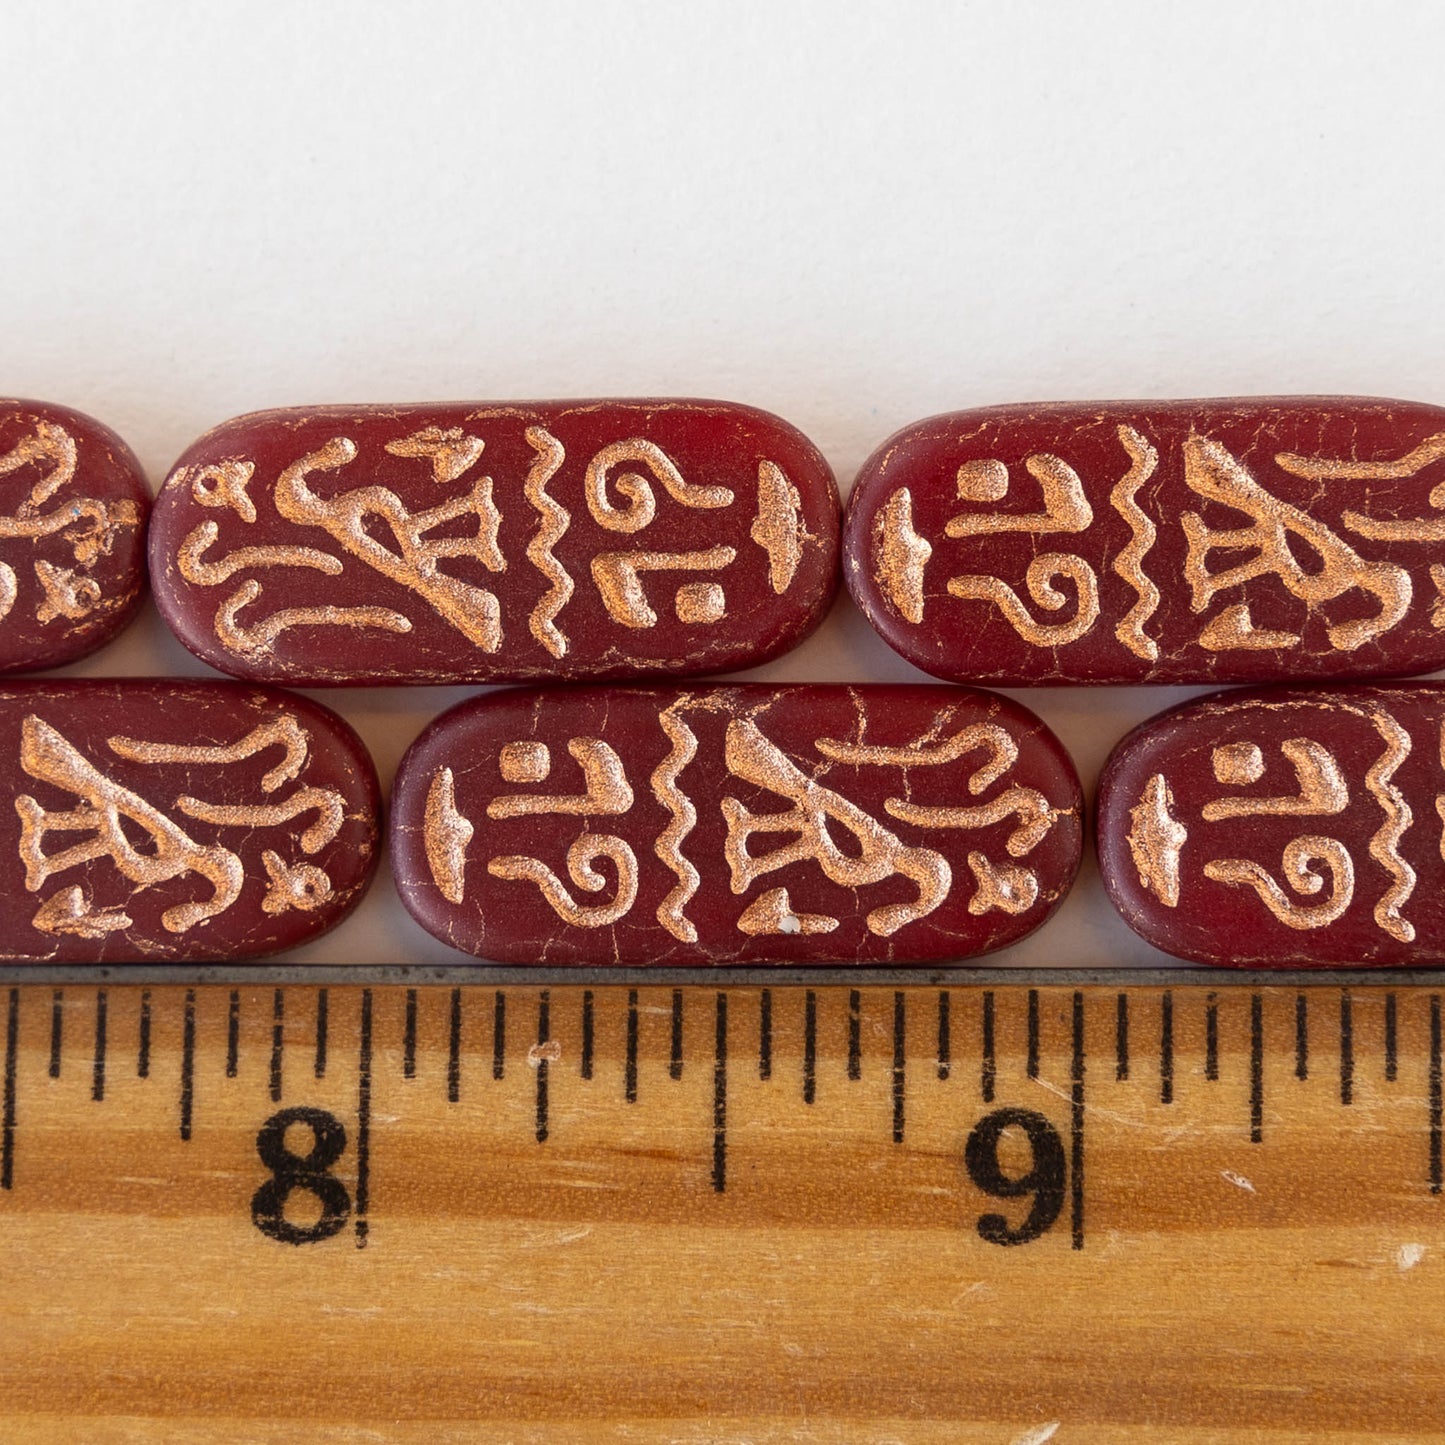 10x25mm Cartouche Beads - Red Matte with a Copper Finish  - 4